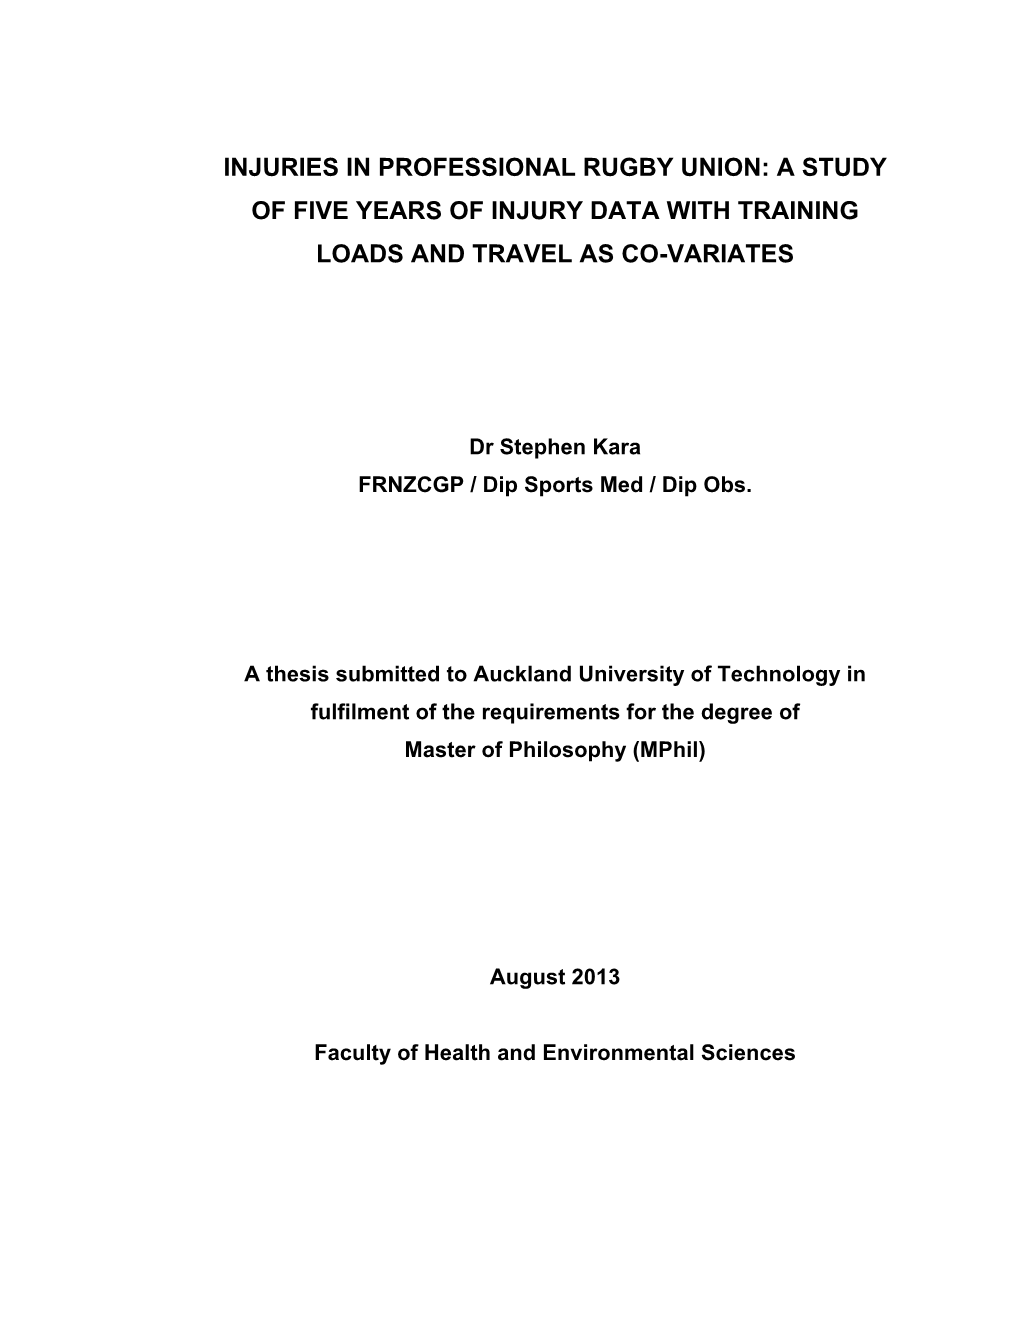 A Study of Five Years of Injury Data with Training Loads and Travel As Co-Variates